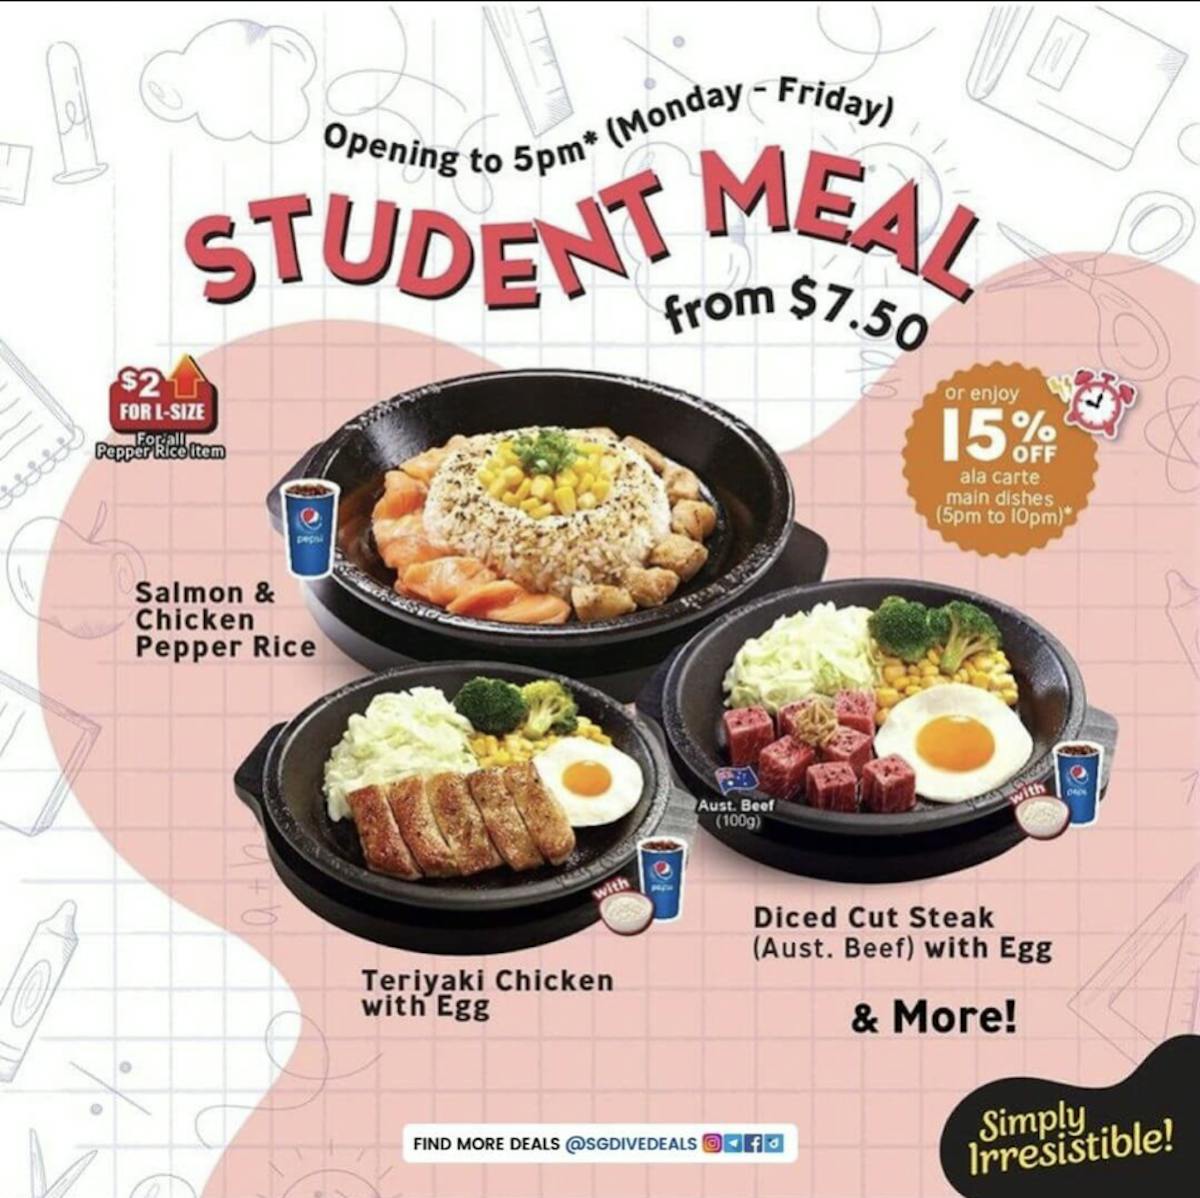 student meal promotion from $7.50 per set